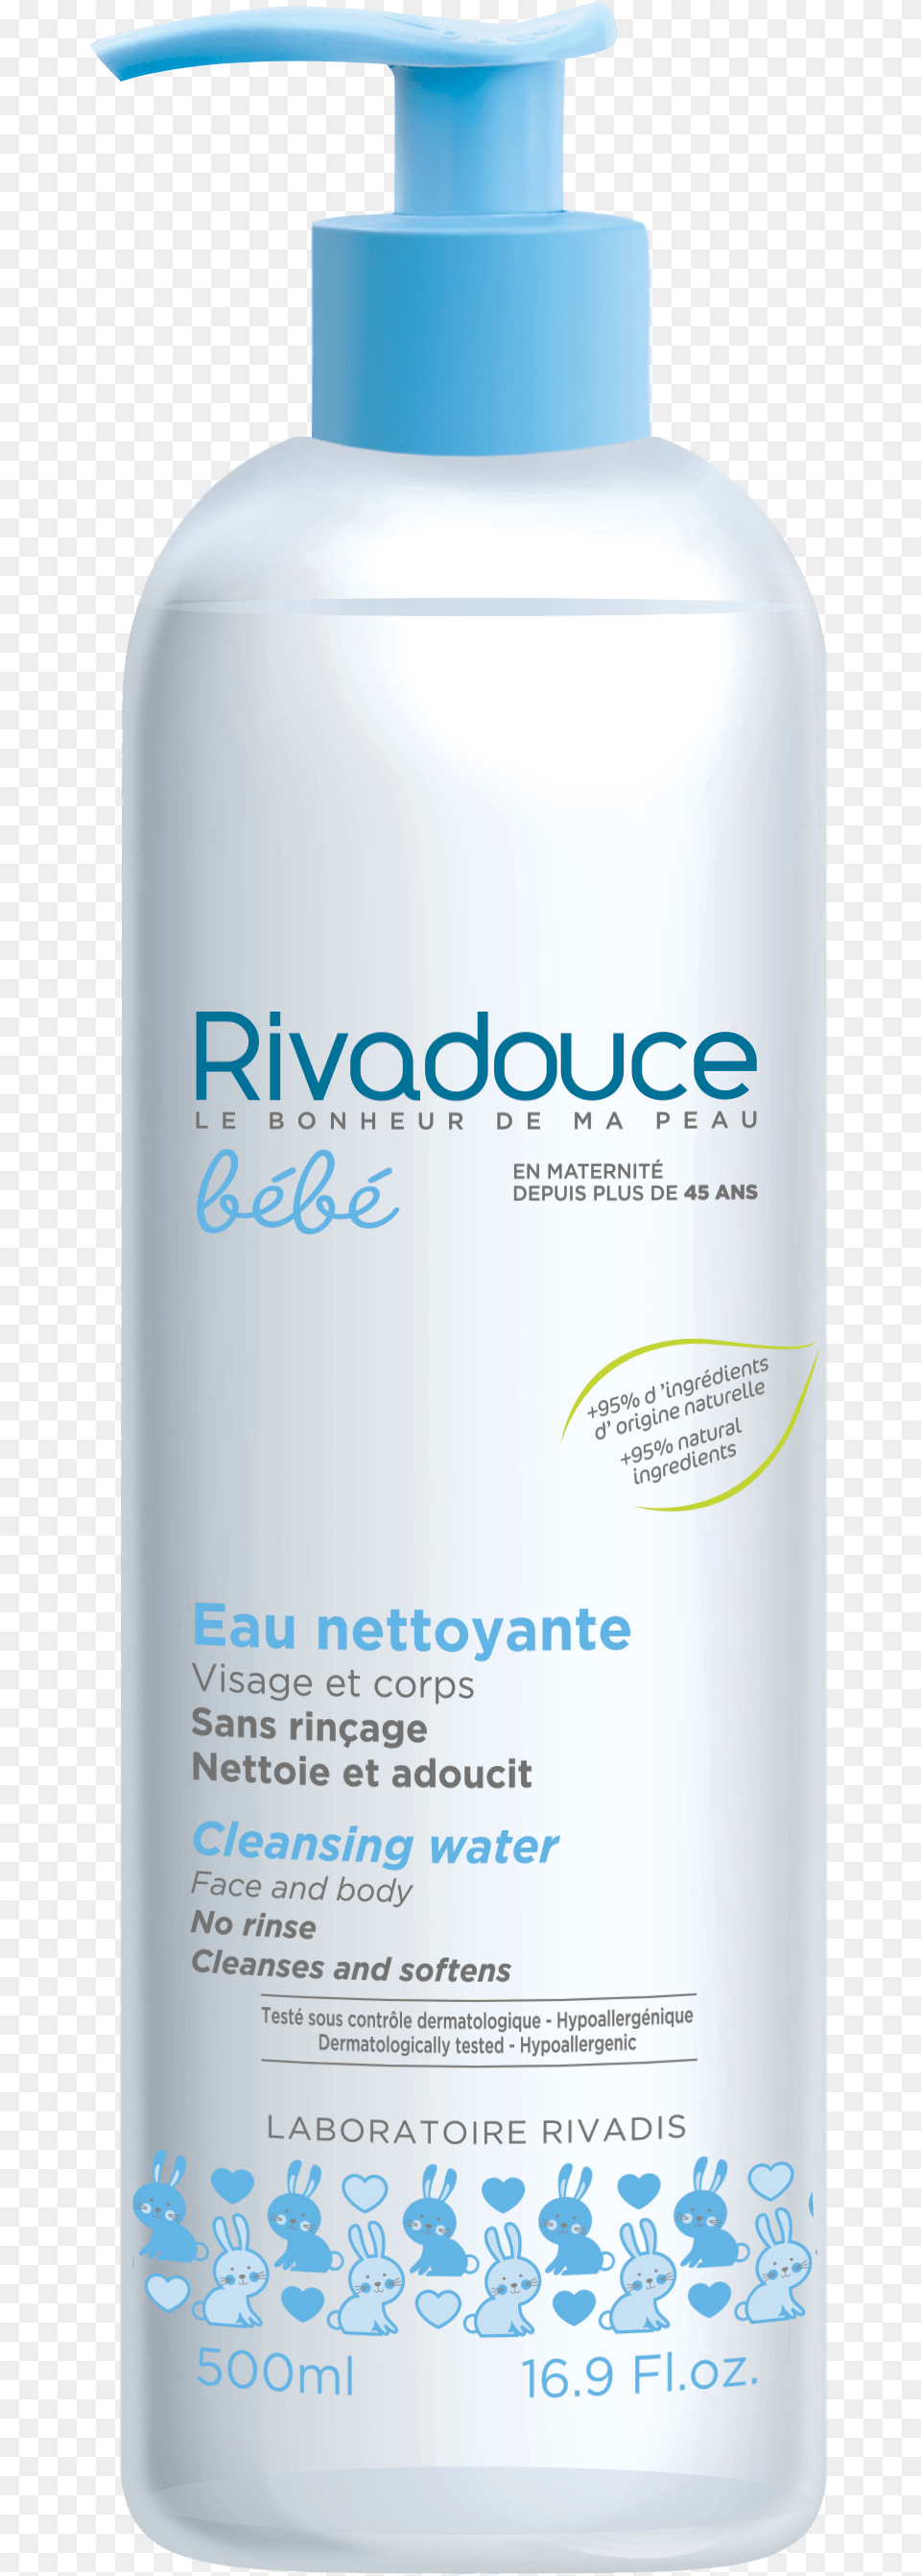 Rivadouce Bb, Bottle, Lotion, Shaker, Cosmetics Png